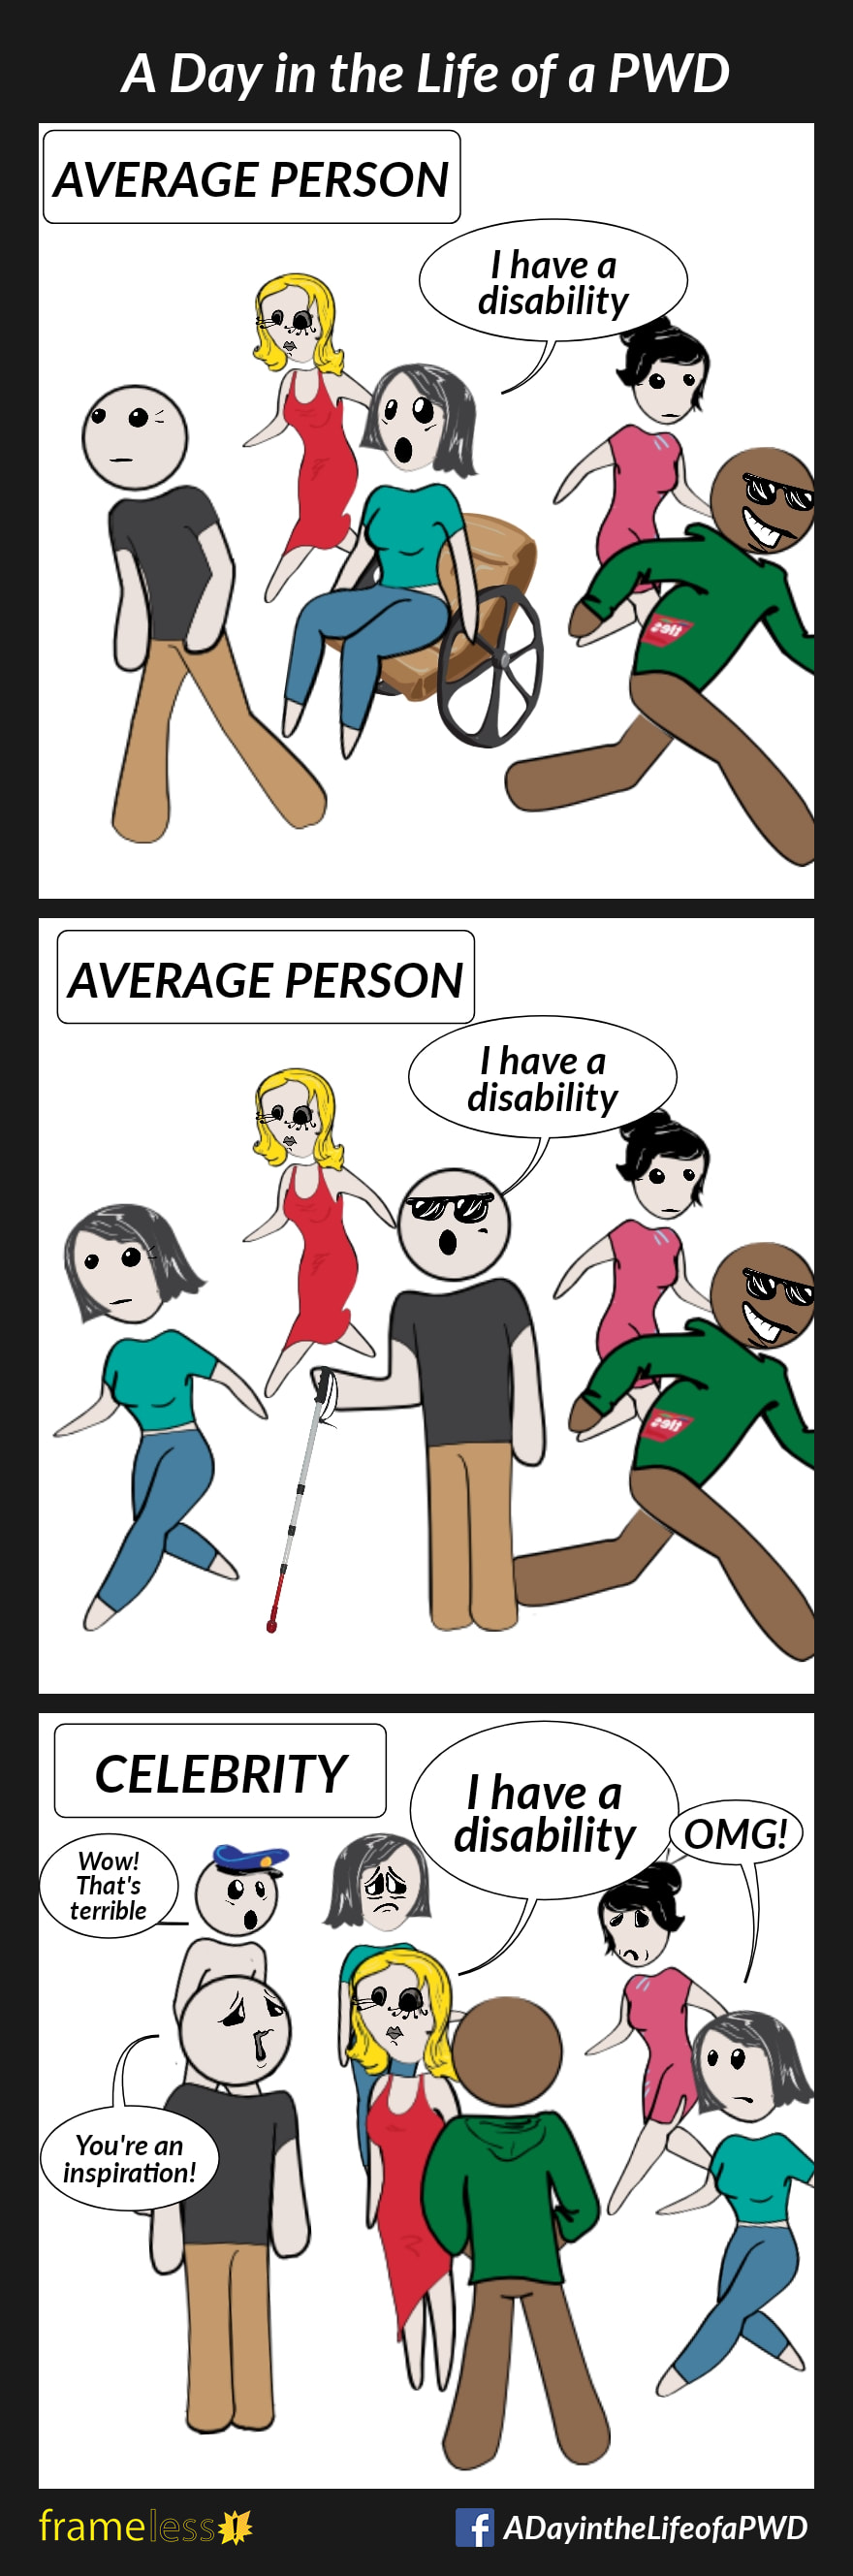 COMIC STRIP 
A Day in the Life of a PWD (Person With a Disability) 

Frame 1:
CAPTION: Average Person 
A woman in a wheelchair is surrounded by people.
WOMAN: I have a disability
The people carry on with their business.

Frame 2:
CAPTION: Average Person 
A man wearing dark glasses and using a white cane is surrounded by people.
MAN: I have a disability
The people carry on with their business. 

Frame 3:
CAPTION: Celebrity
A movie star is surrounded by people. 
STAR: I have a disability 
The people stop and gather around her sympathetically, saying things like:
